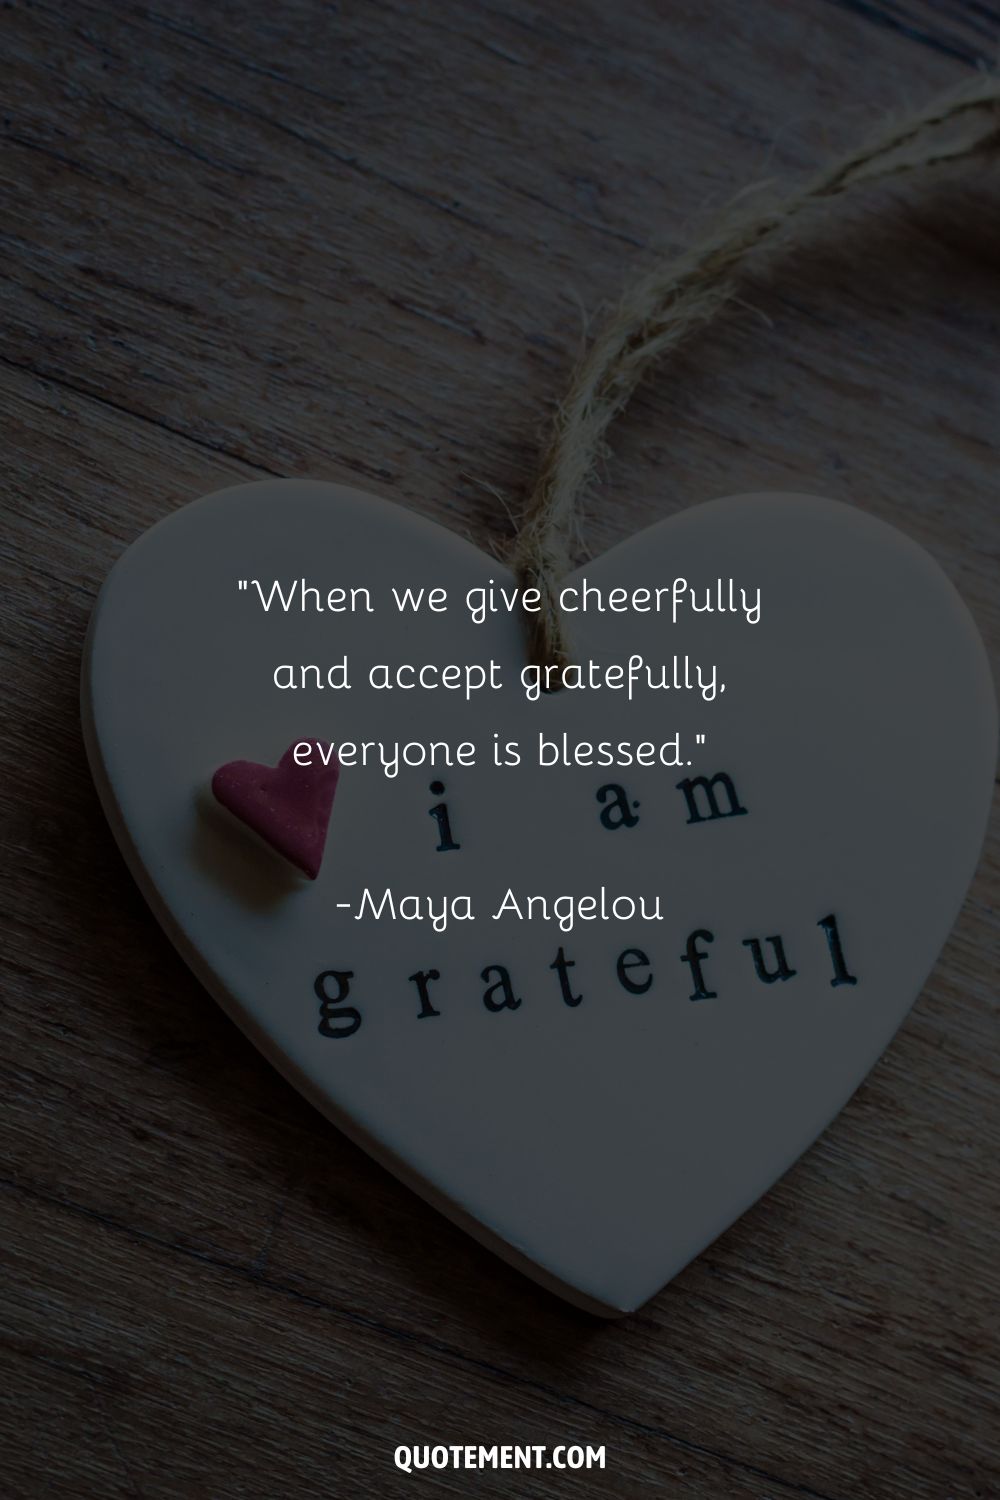 When we give cheerfully and accept gratefully, everyone is blessed